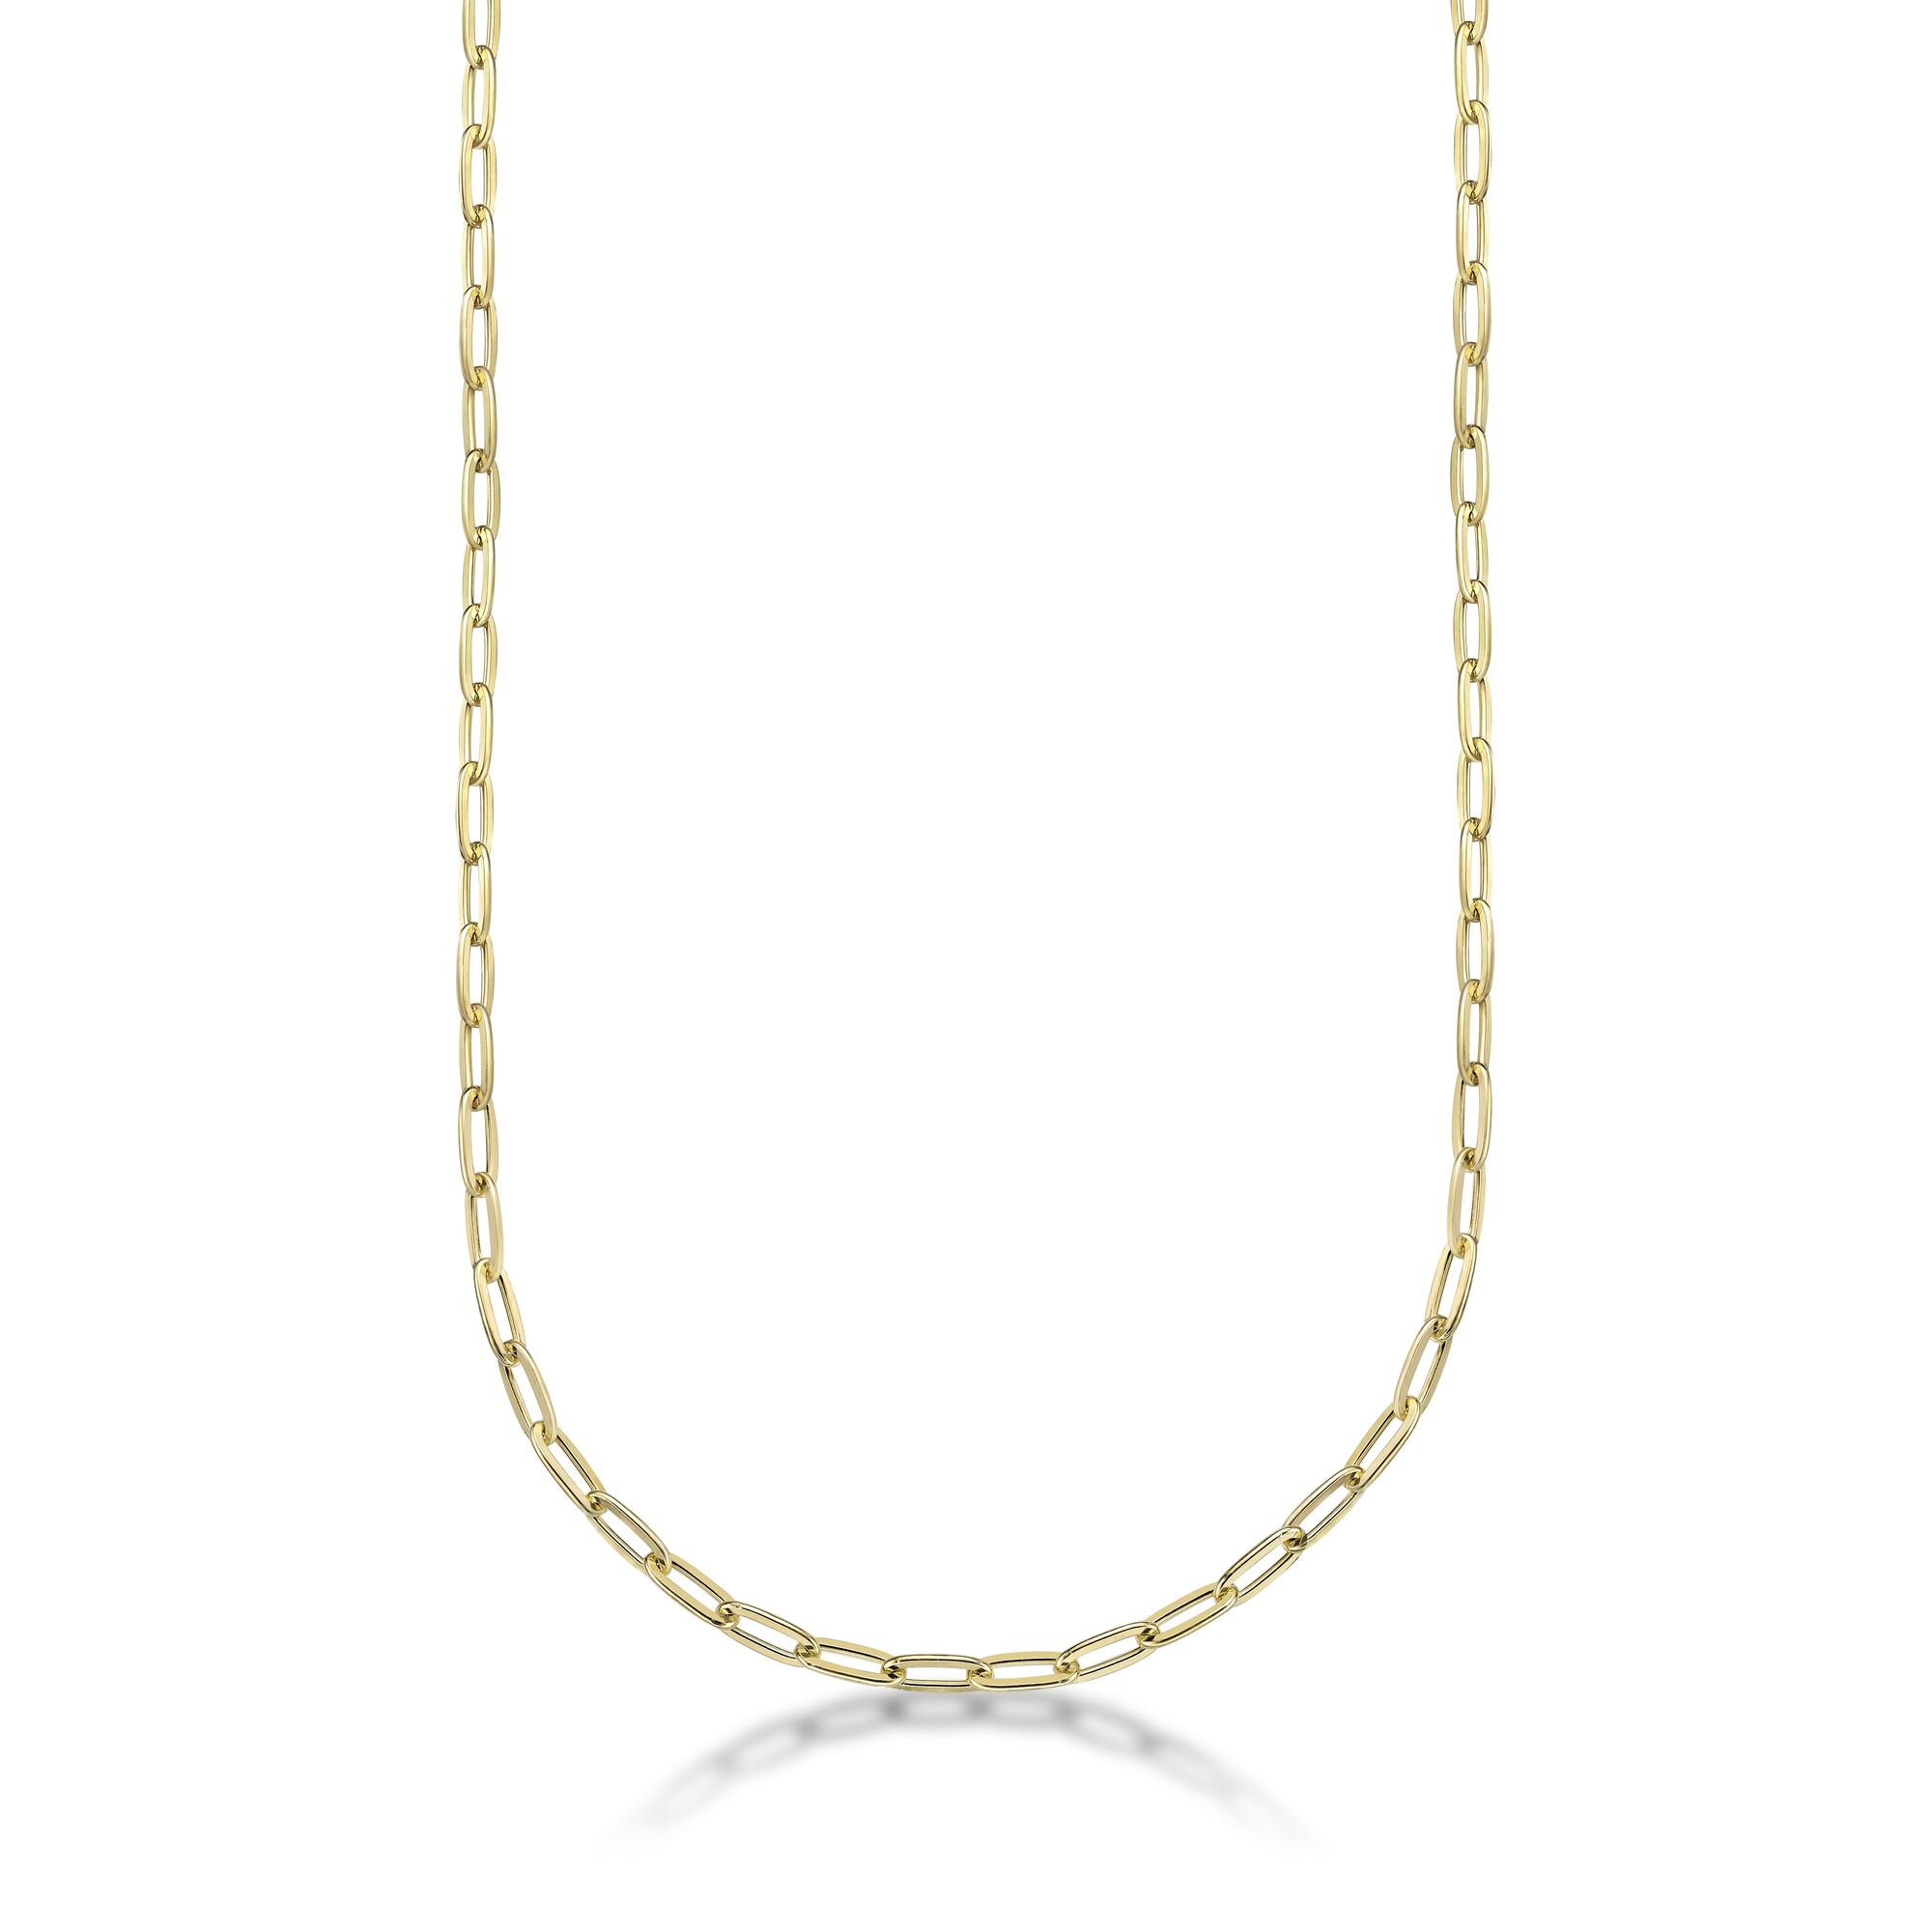 Lavari Jewelers 5.5 MM Paper Clip Link Chain Necklace, Yellow Gold Plating 925 Sterling Silver, 16 Inches